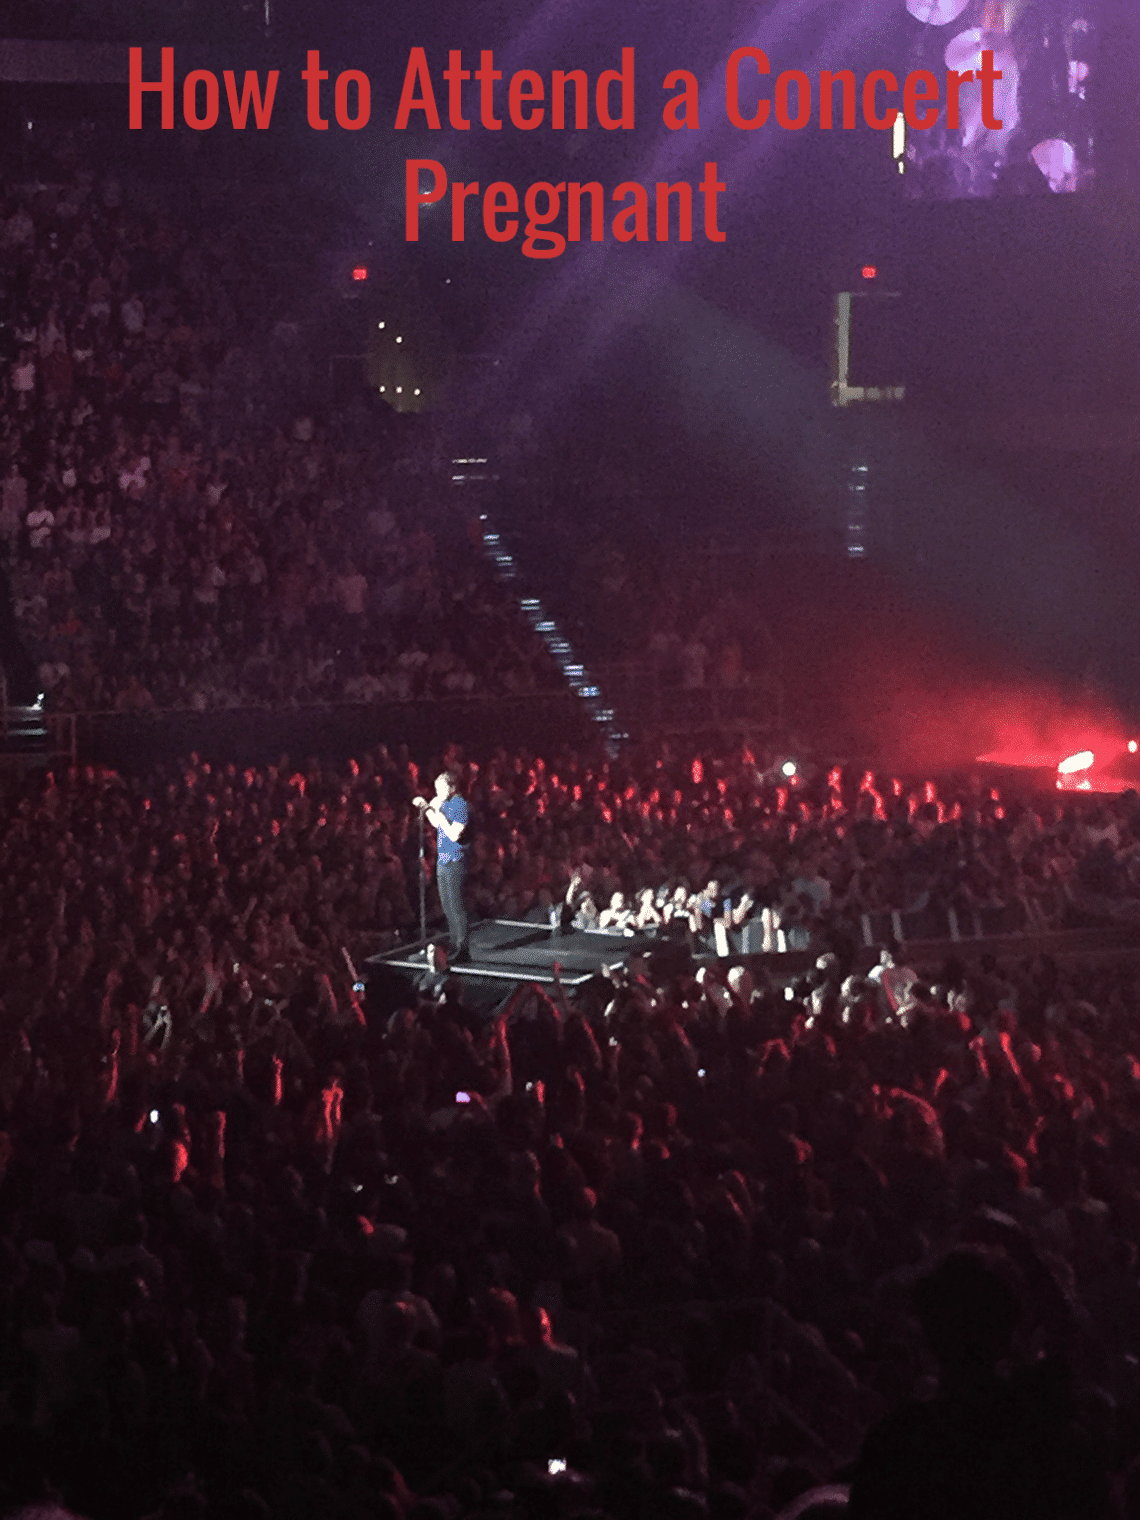 How to attend a concert pregnant